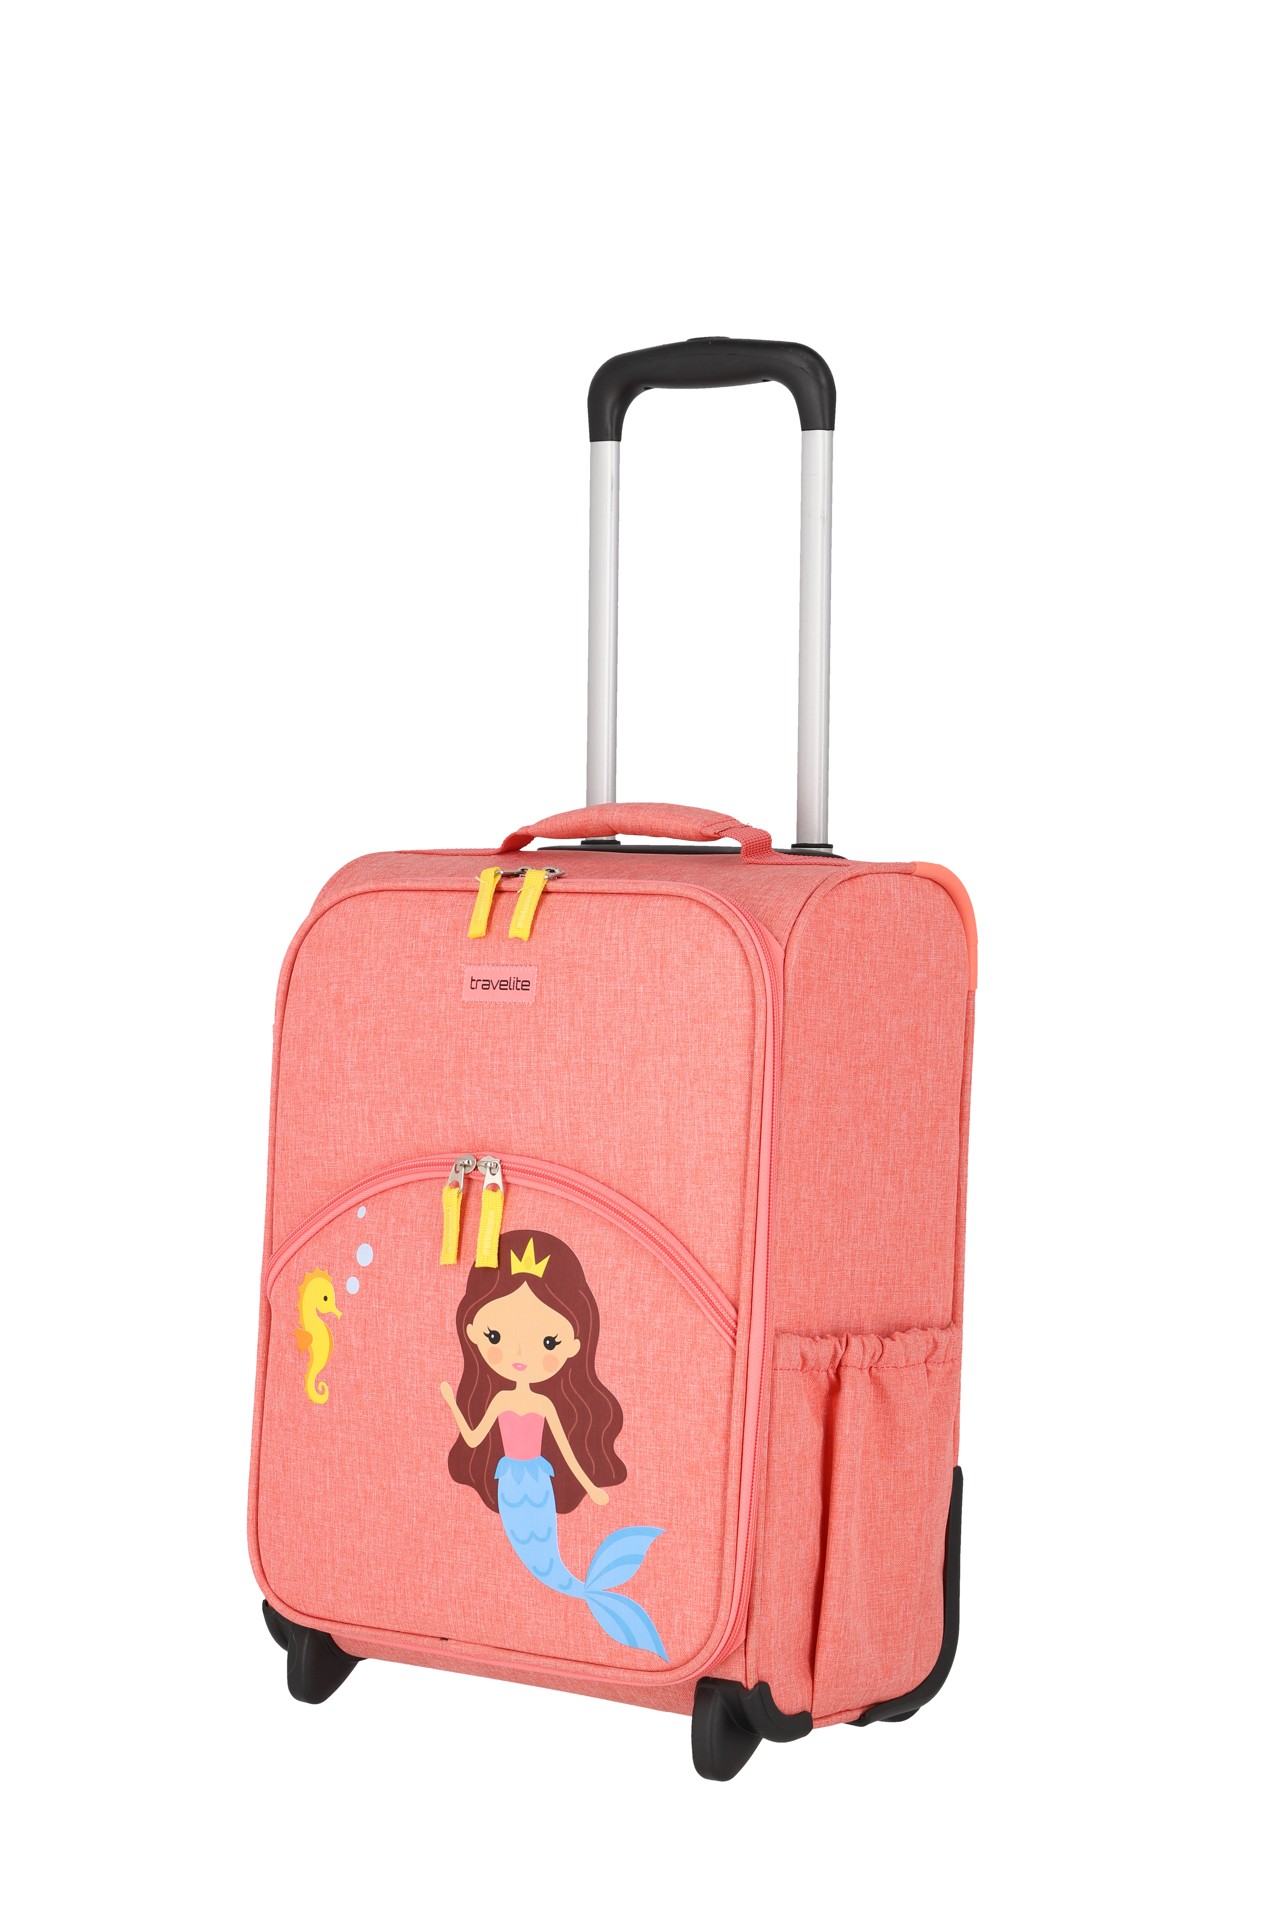 E-shop Travelite Youngster 2w Mermaid